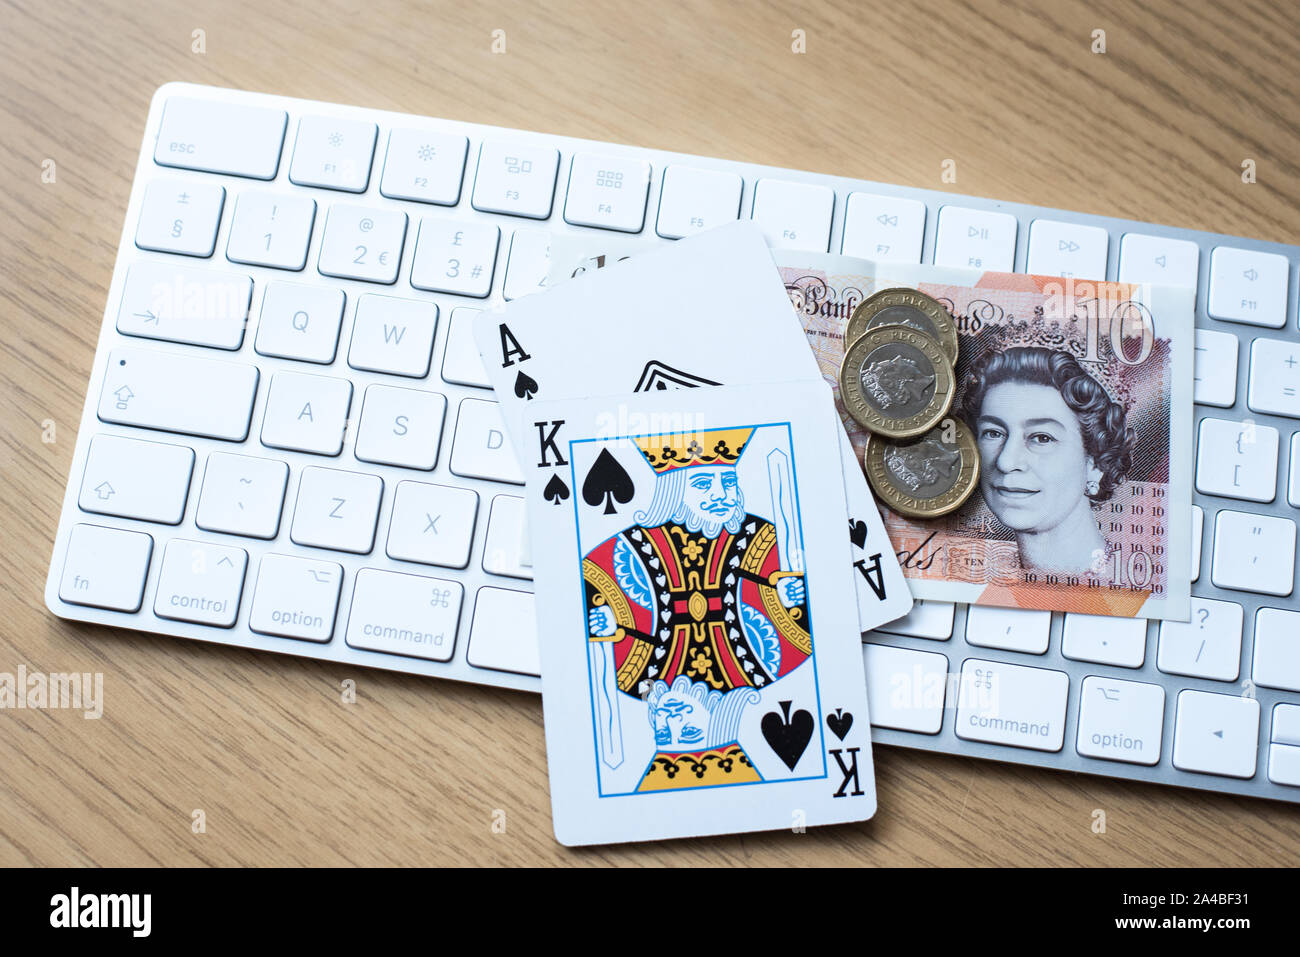 Online gambling and poker play concept with keyboard on a table with King and Ace cards alongside english currency and coins Stock Photo